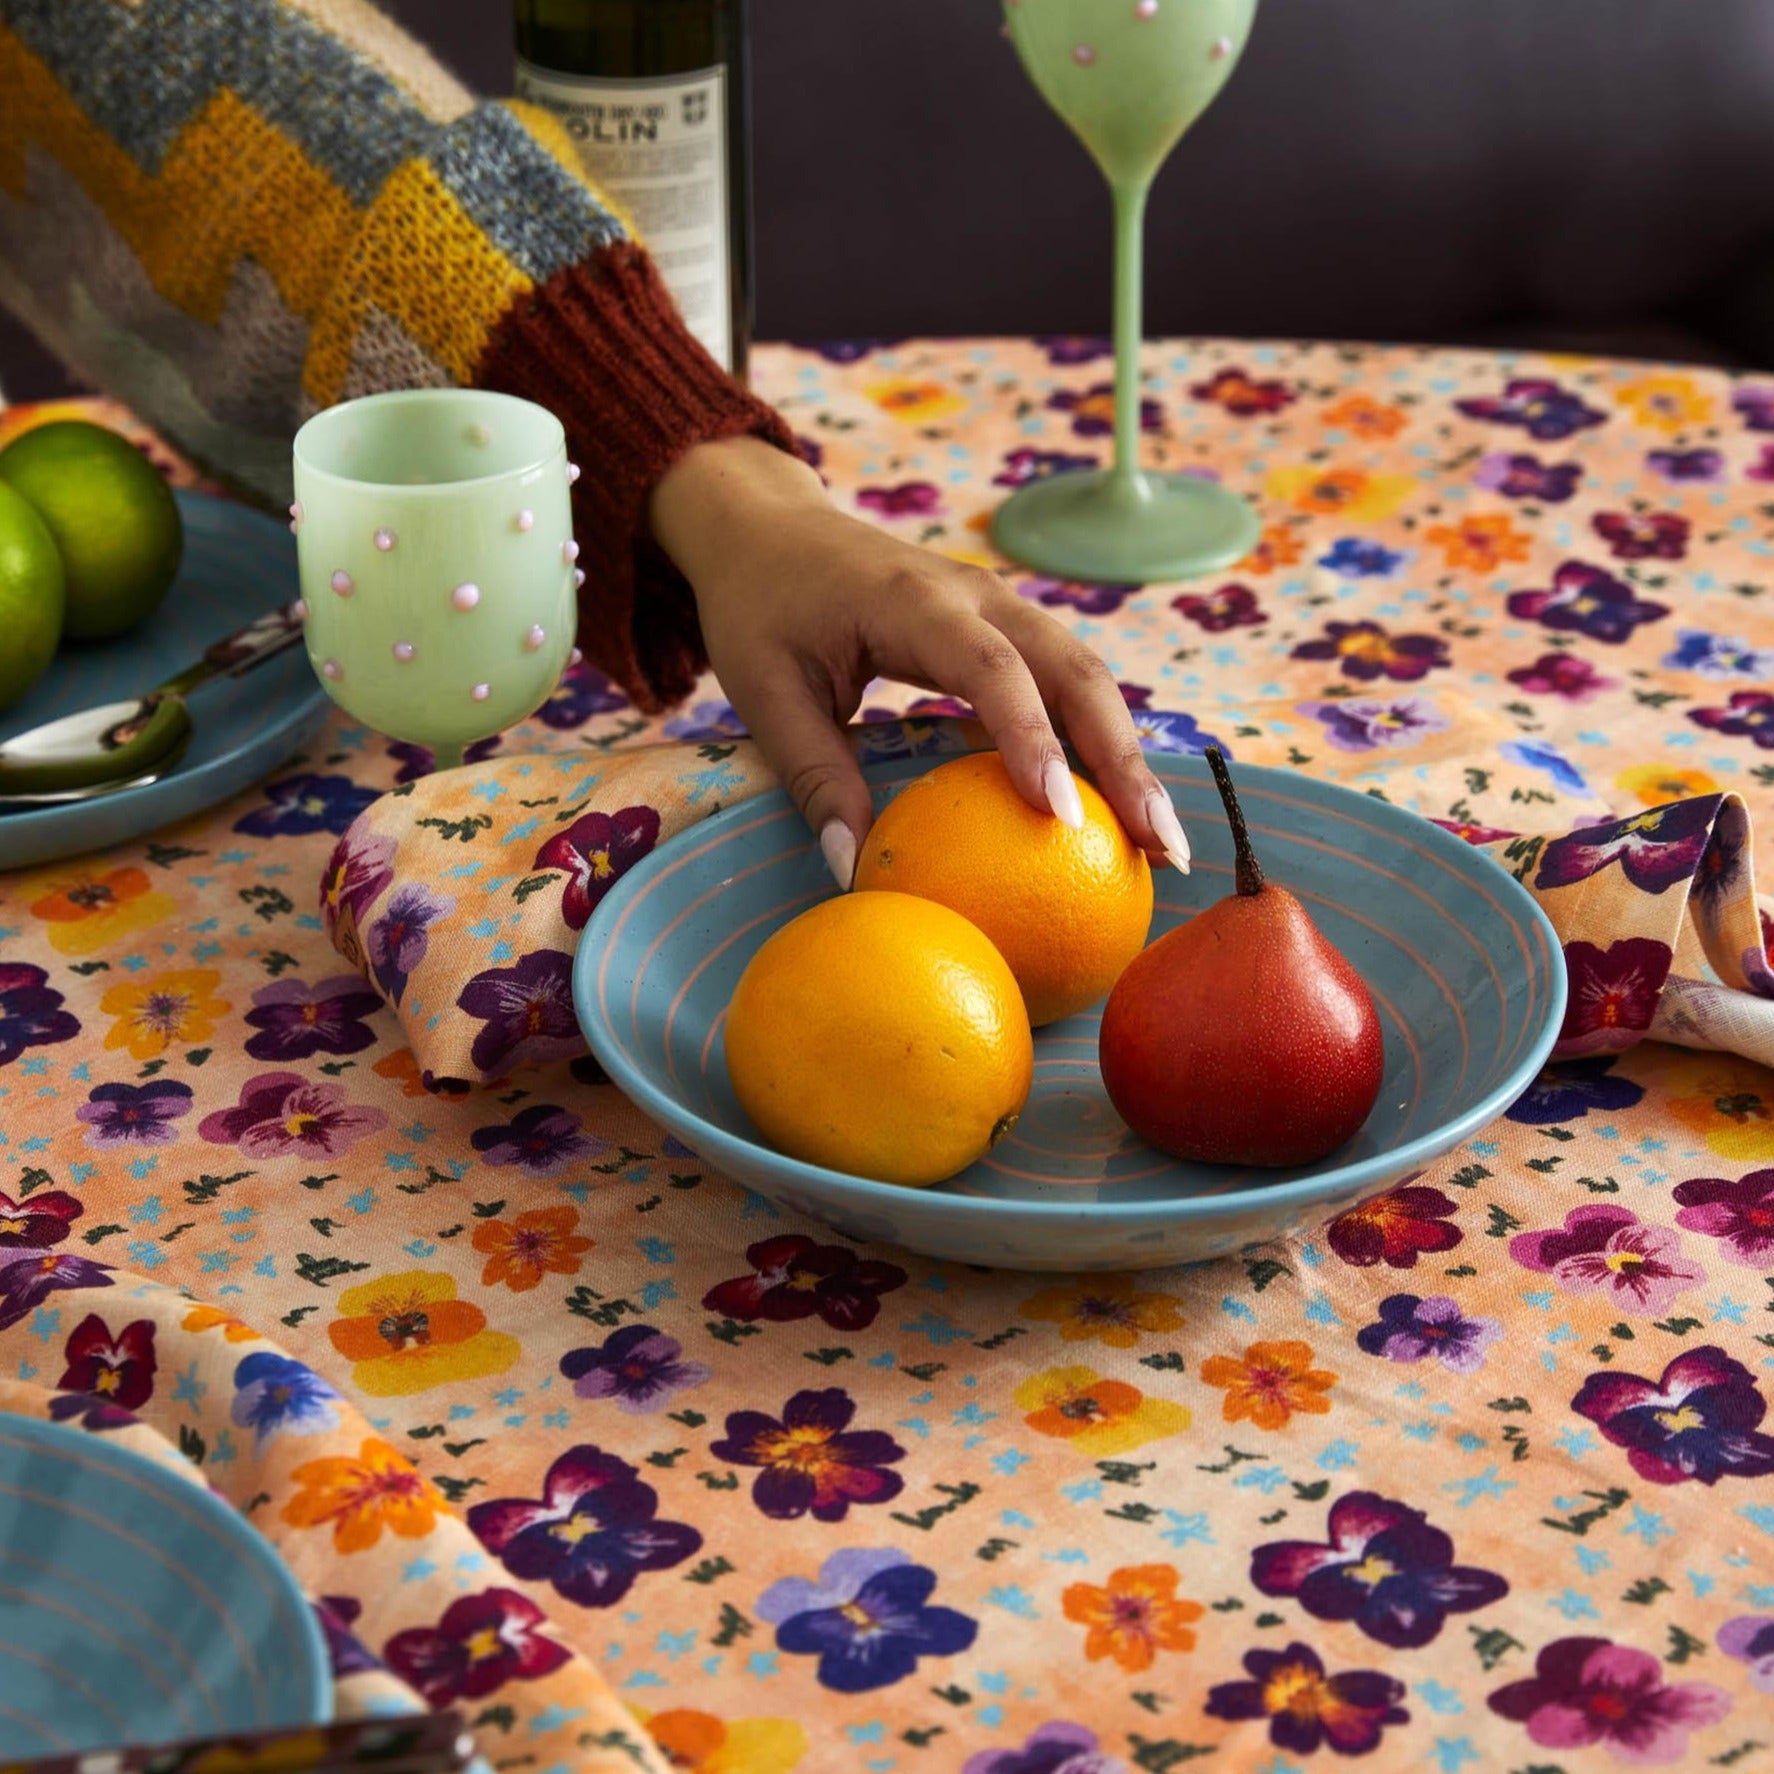 Linen Tablecloth - Pansy